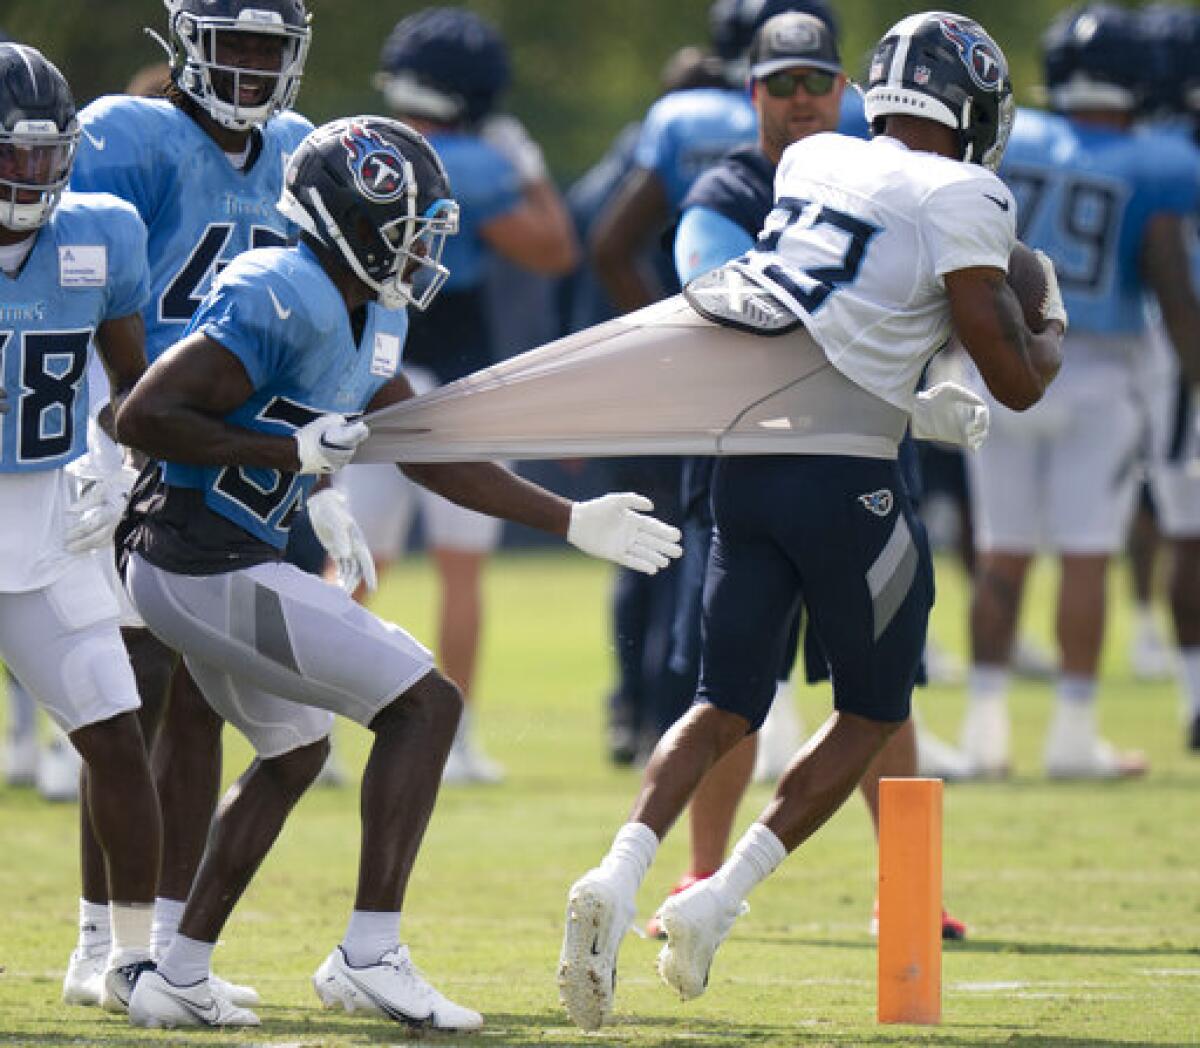 Tennessee Titans safety A.J. Moore Jr. (33) pulls on running back Trenton Cannon's (23) jersey during during an NFL football practice in Nashville, Tenn., Monday, Aug. 15, 2022. (George Walker IV/The Tennessean via AP)